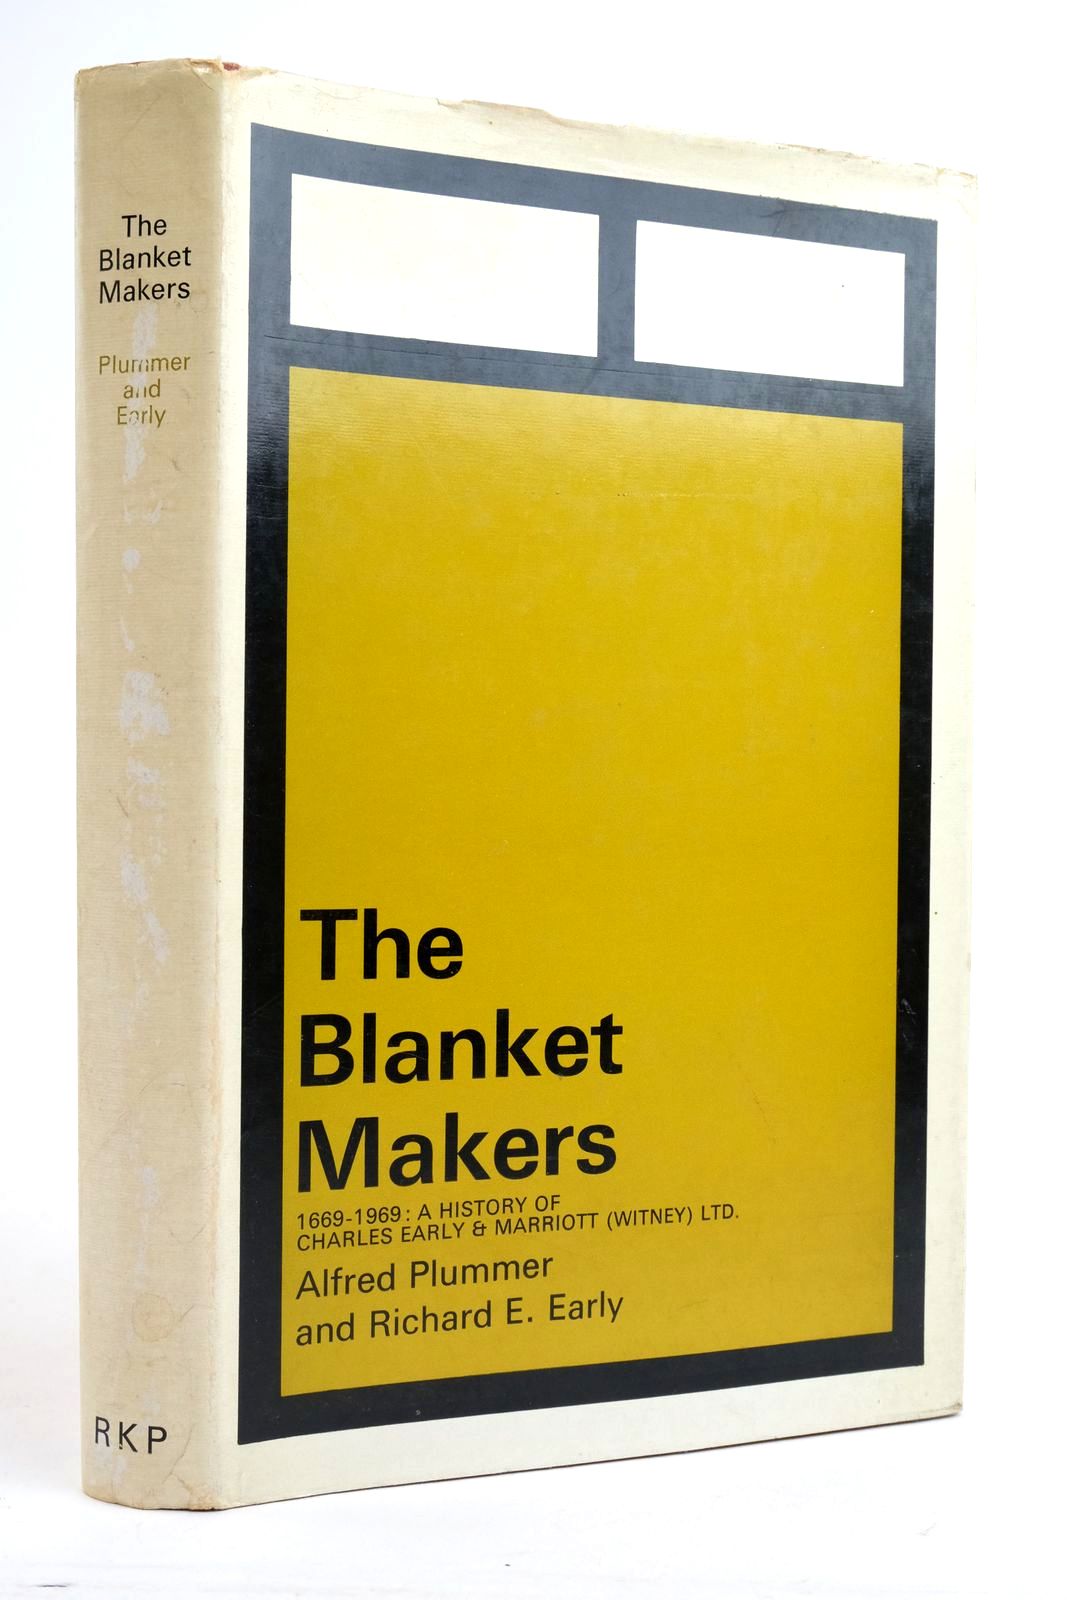 Photo of THE BLANKET MAKERS 1669-1969: A HISTORY OF CHARLES EARLY &amp; MARRIOTT (WITNEY) LTD written by Plummer, Alfred Early, Richard E. published by Routledge &amp; Kegan Paul Ltd (STOCK CODE: 2136240)  for sale by Stella & Rose's Books